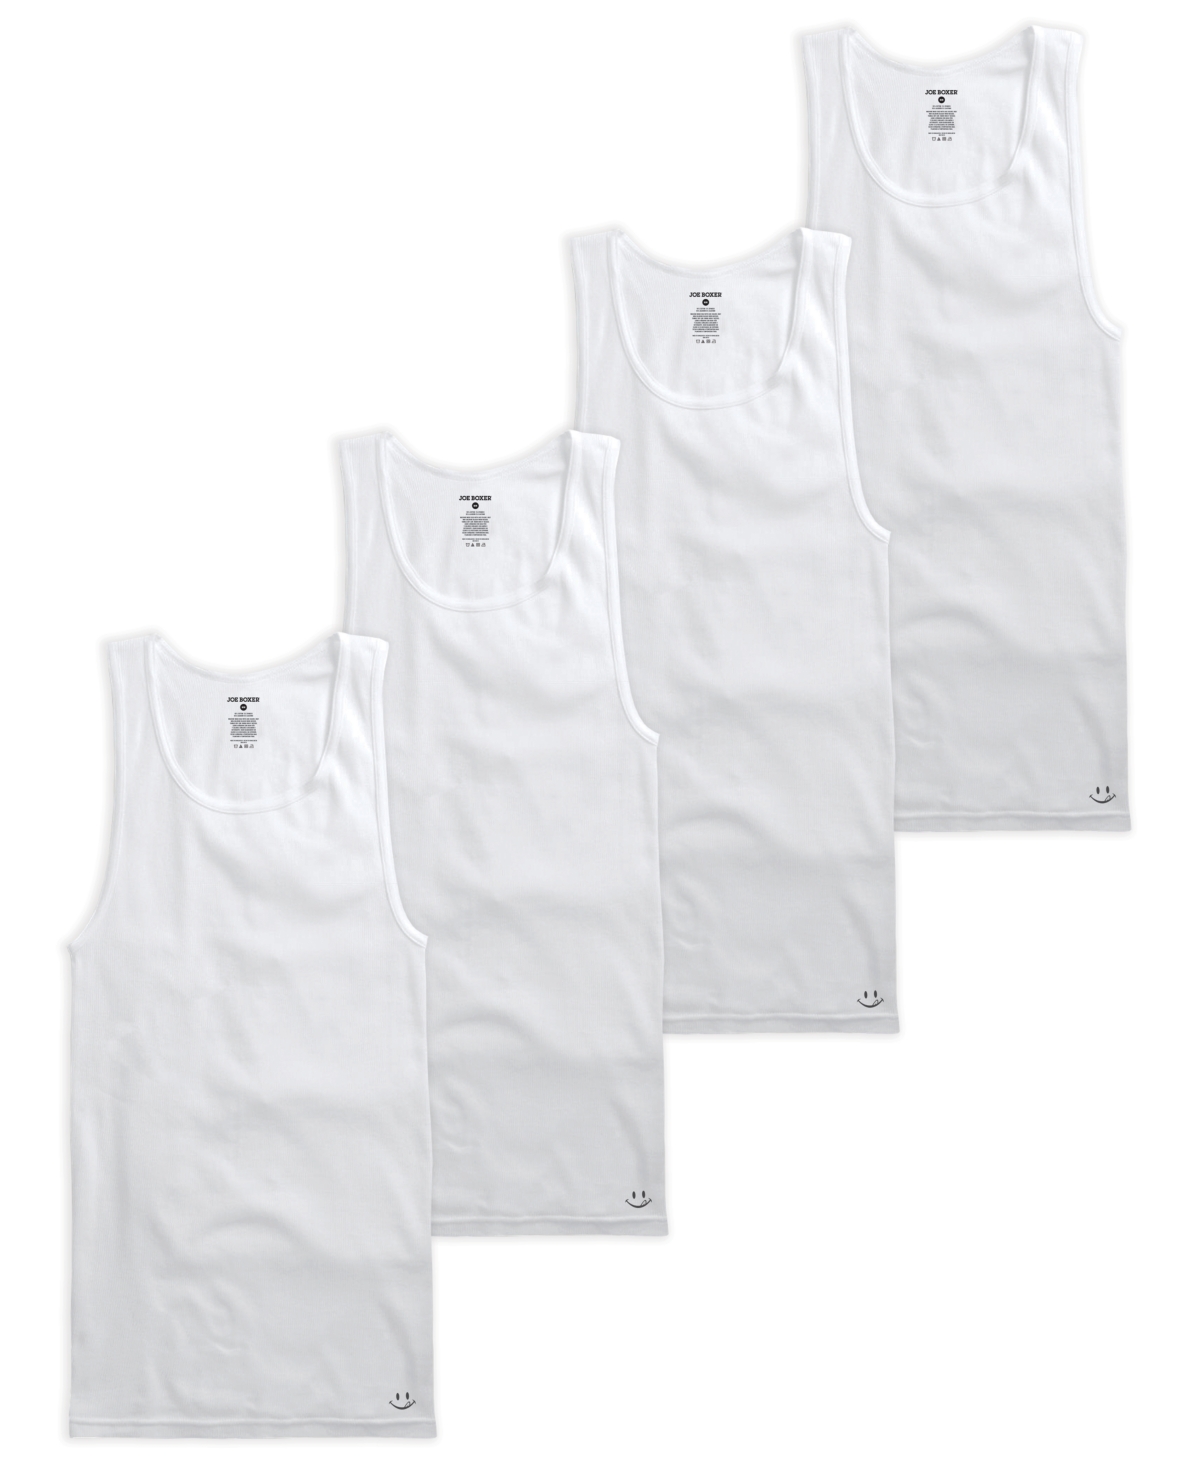 Men's Tank Top A-Shirt, Pack of 4 - White